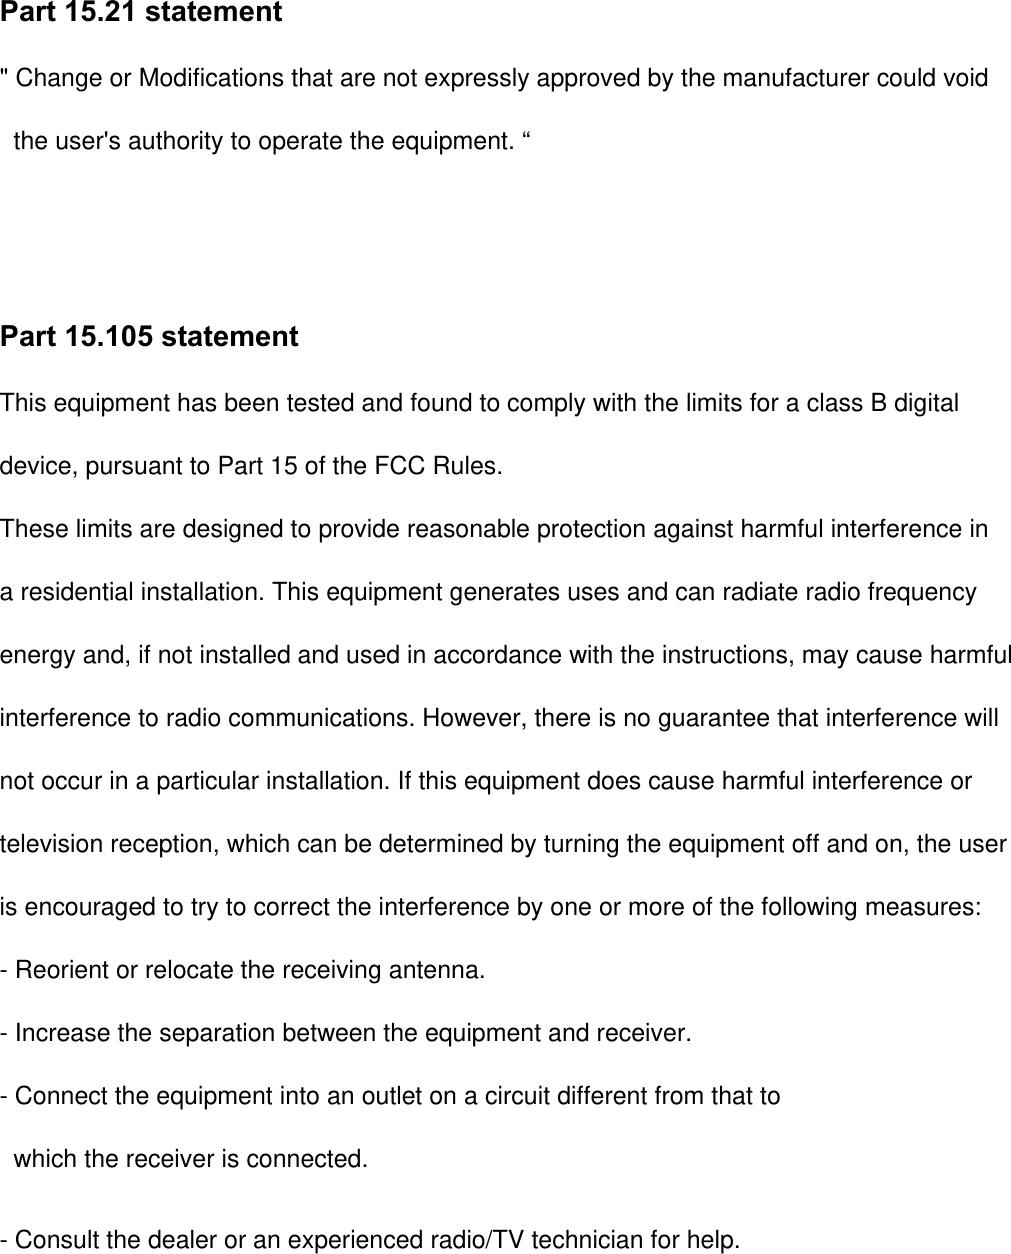 Part 15.21 statement&quot; Change or Modifications that are not expressly approved by the manufacturer could void        the user&apos;s authority to operate the equipment. “Part 15.105 statement This equipment has been tested and found to comply with the limits for a class B digitaldevice, pursuant to Part 15 of the FCC Rules. These limits are designed to provide reasonable protection against harmful interference in a residential installation. This equipment generates uses and can radiate radio frequency energy and, if not installed and used in accordance with the instructions, may cause harmfulinterference to radio communications. However, there is no guarantee that interference willnot occur in a particular installation. If this equipment does cause harmful interference or television reception, which can be determined by turning the equipment off and on, the user is encouraged to try to correct the interference by one or more of the following measures:- Reorient or relocate the receiving antenna.- Increase the separation between the equipment and receiver.- Connect the equipment into an outlet on a circuit different from that towhich the receiver is connected.- Consult the dealer or an experienced radio/TV technician for help.